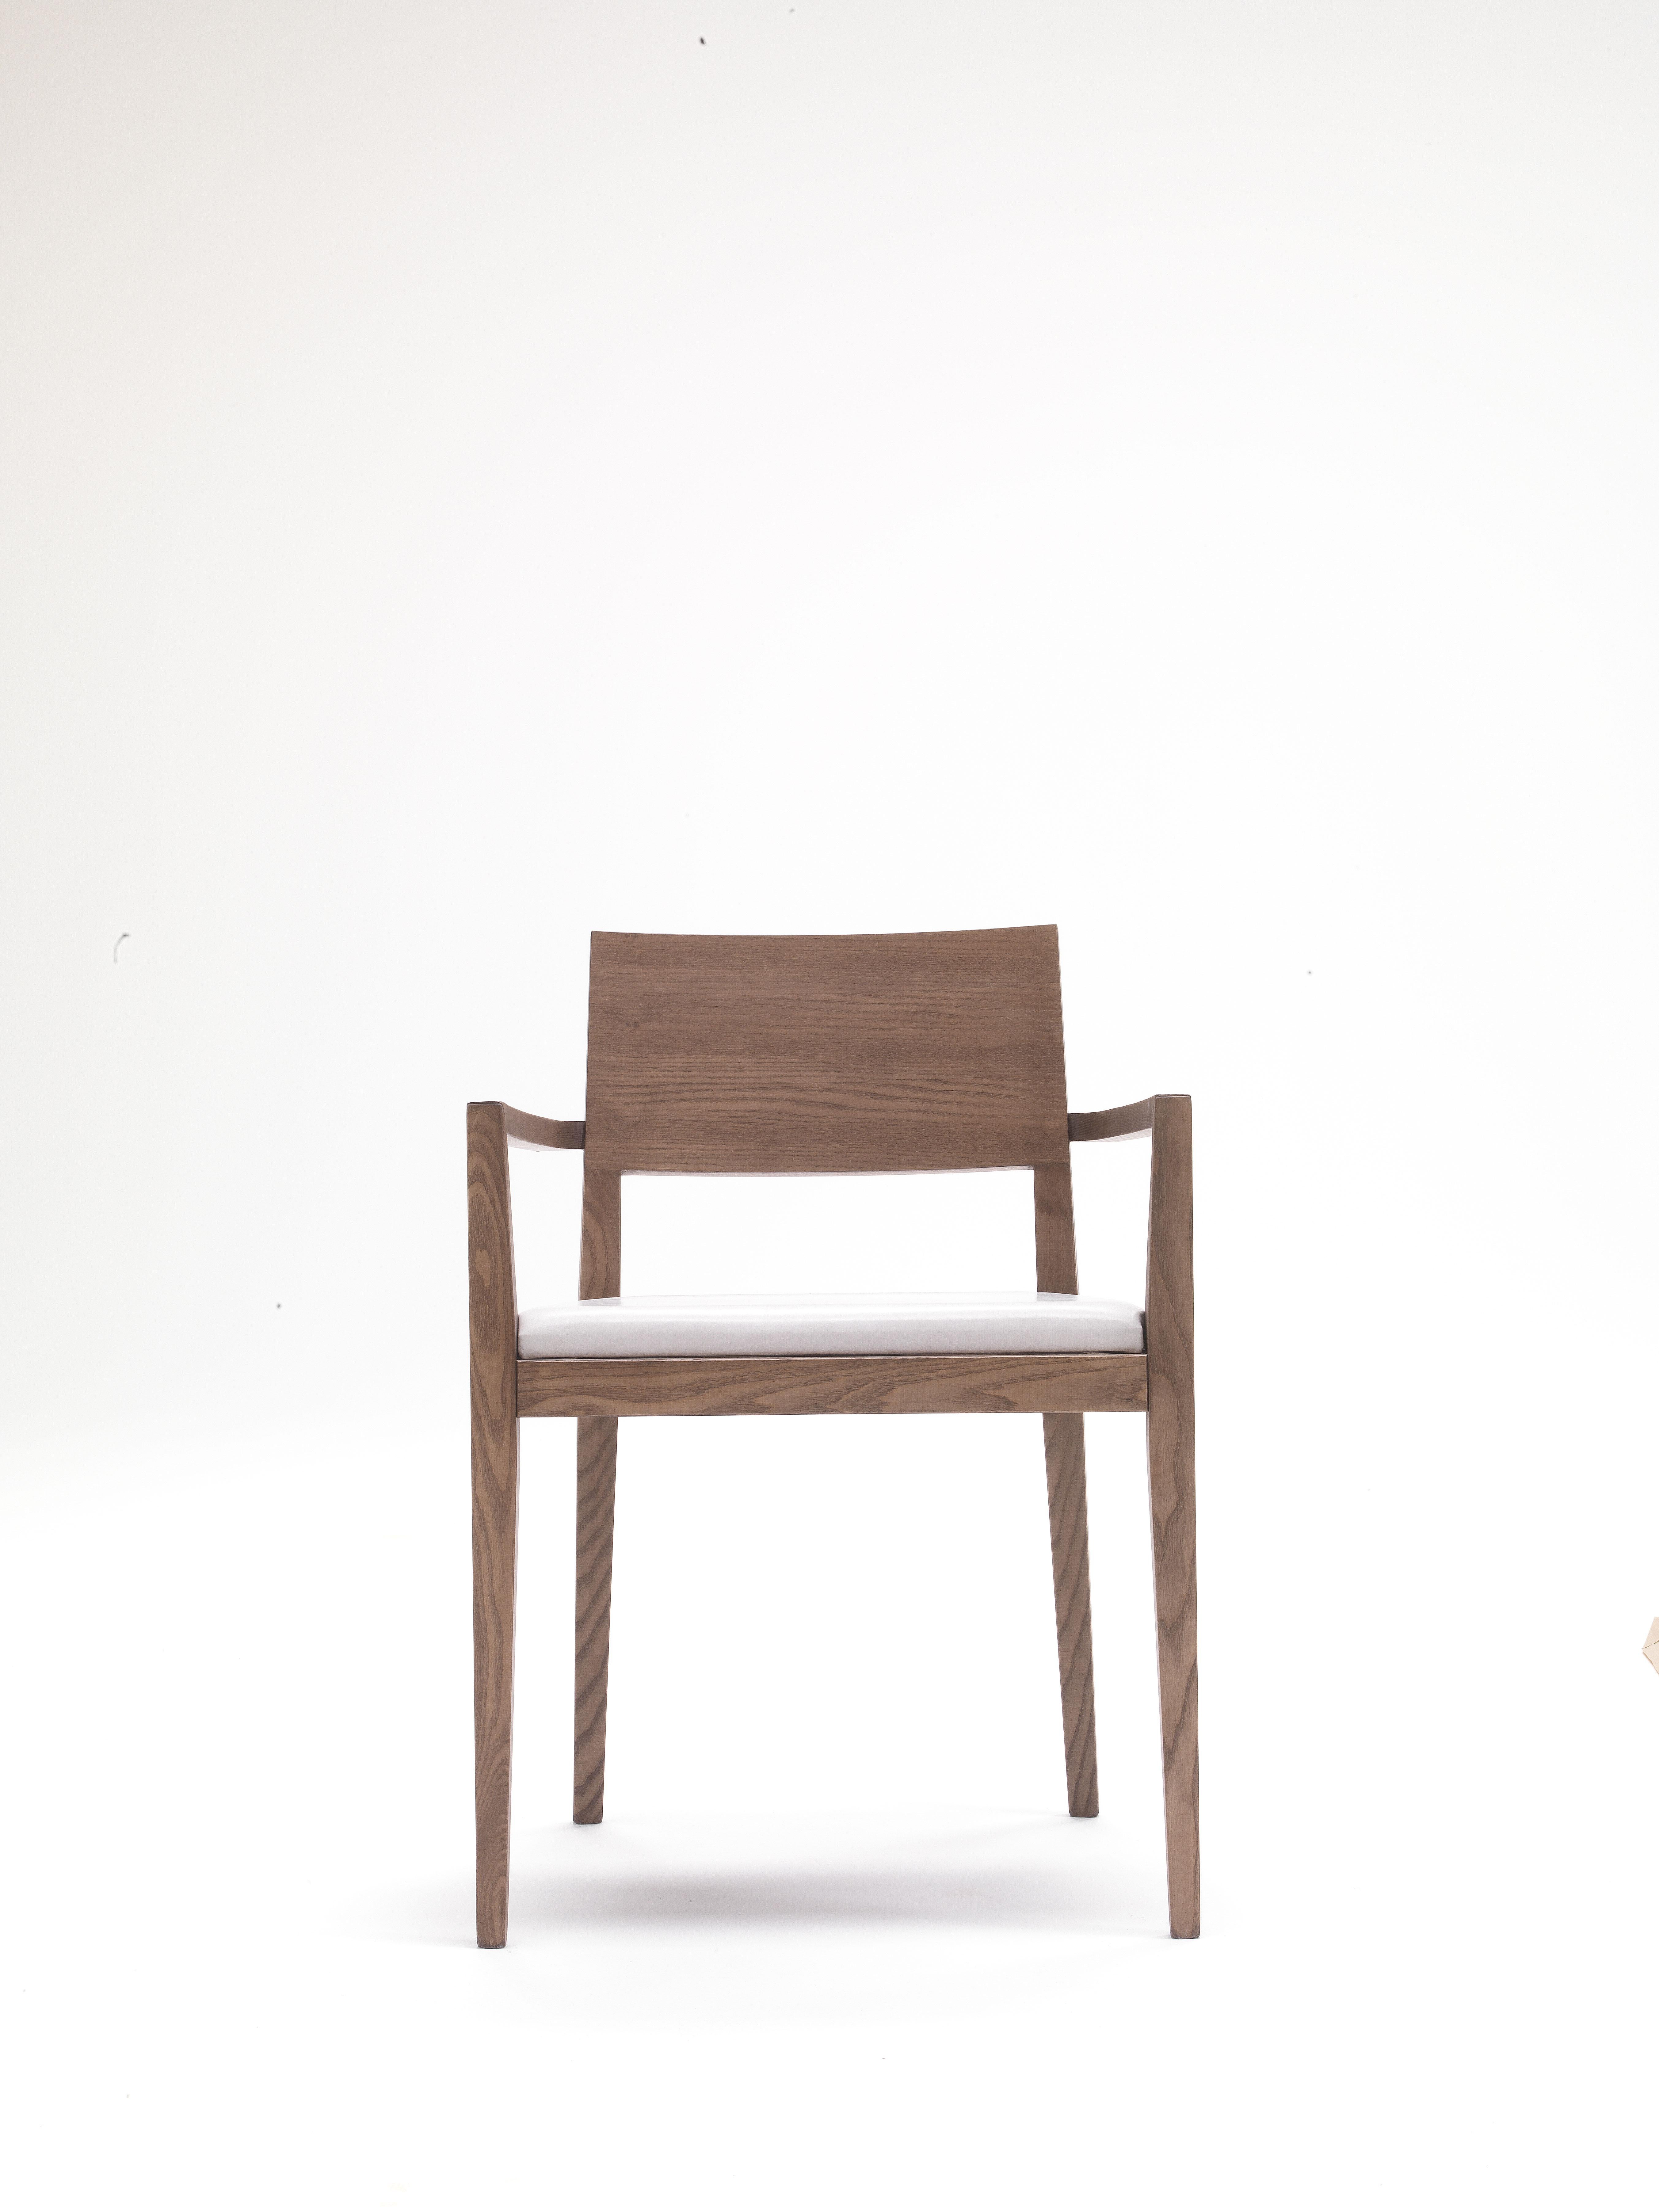 Chair with structure in solid ash and seat covered in leather, eco-leather or fabric of the collection. Fixed or removable fabric.